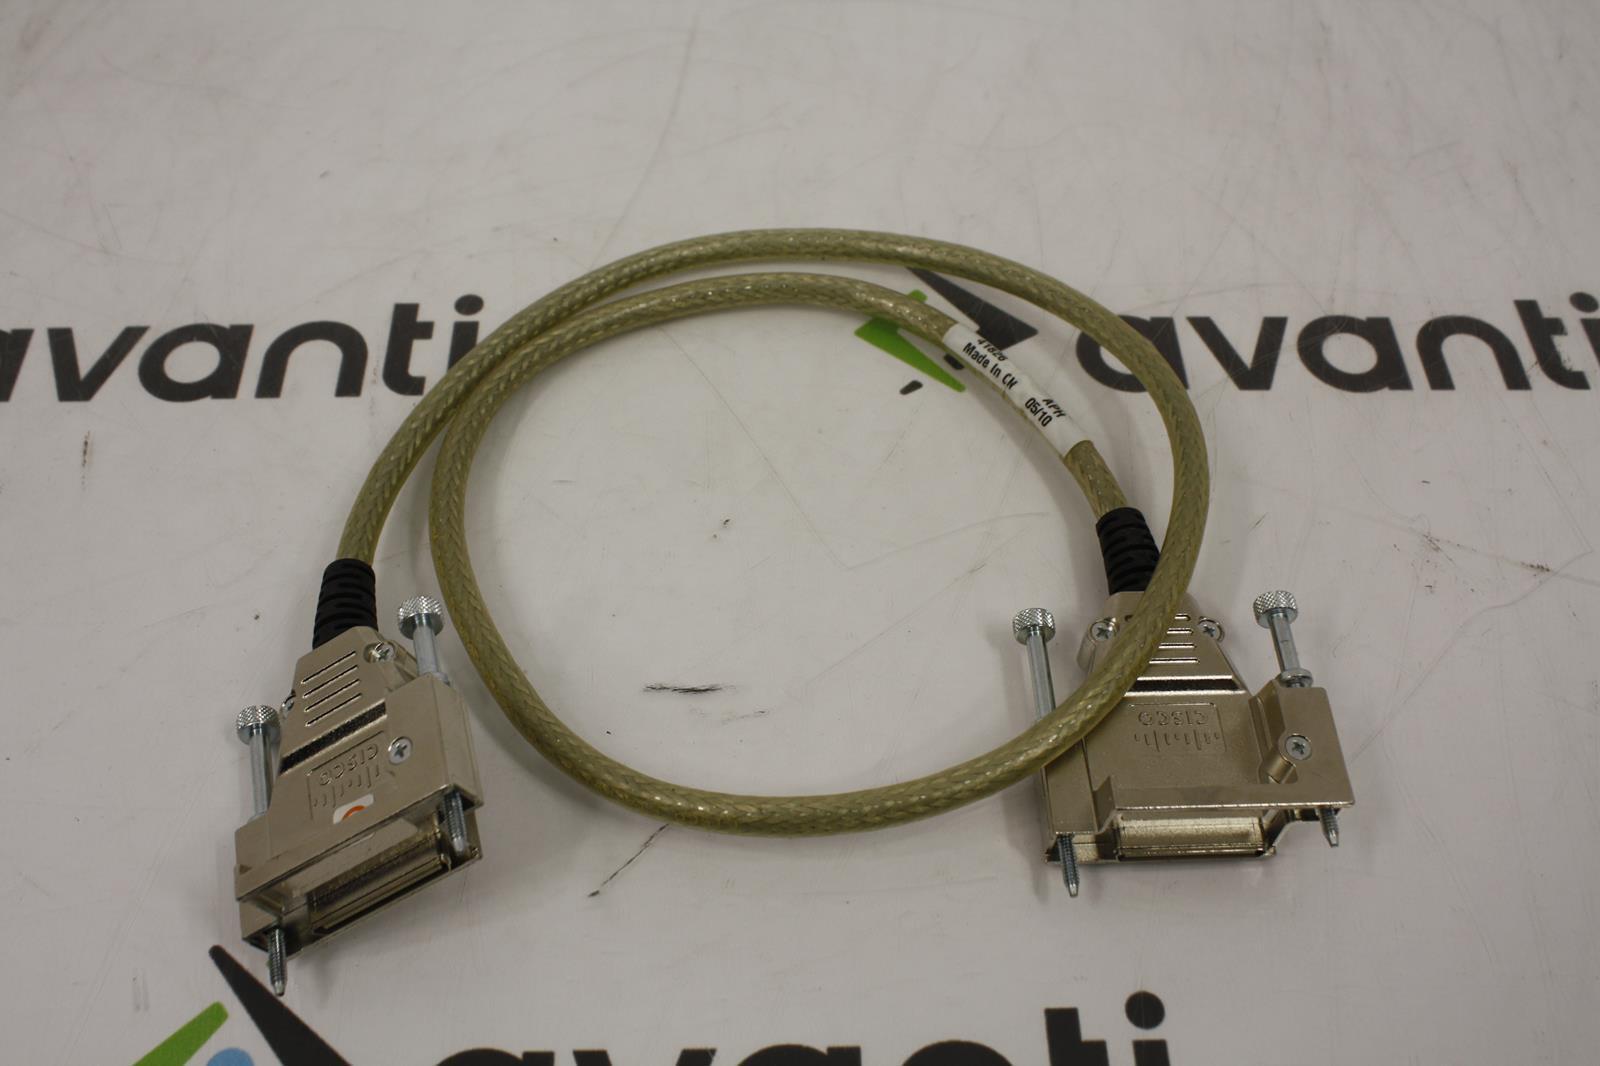 GENUINE CISCO 72 2633 01 CAB STACK 1M STACKWISE 1M STACKING CABLE